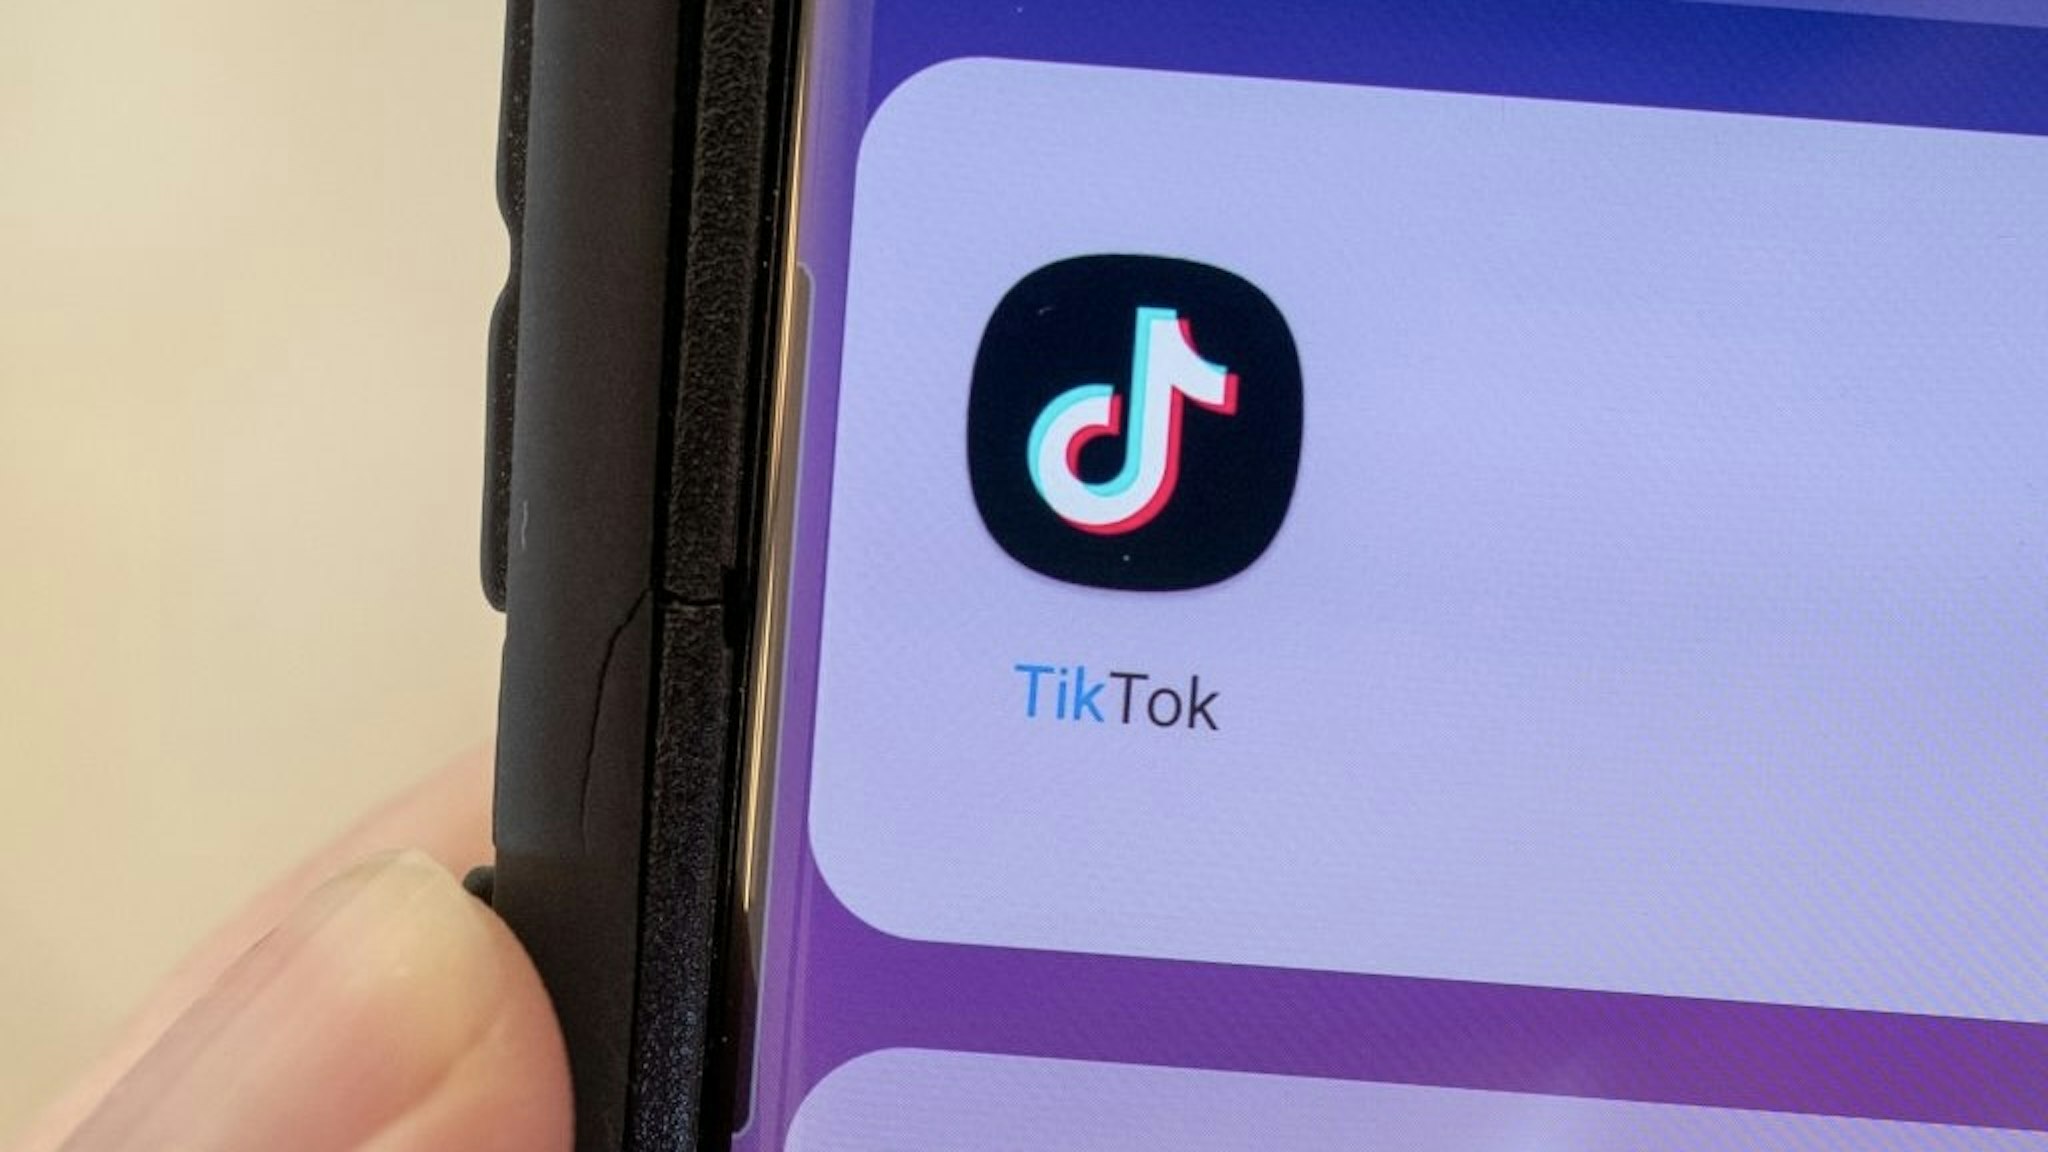 Tiktok Close-up of human hand holding a cellphone displaying icon for the TikTok video sharing app, Lafayette, California, September 22, 2021. (Photo by Smith Collection/Gado/Getty Images) Smith Collection/Gado / Contributor